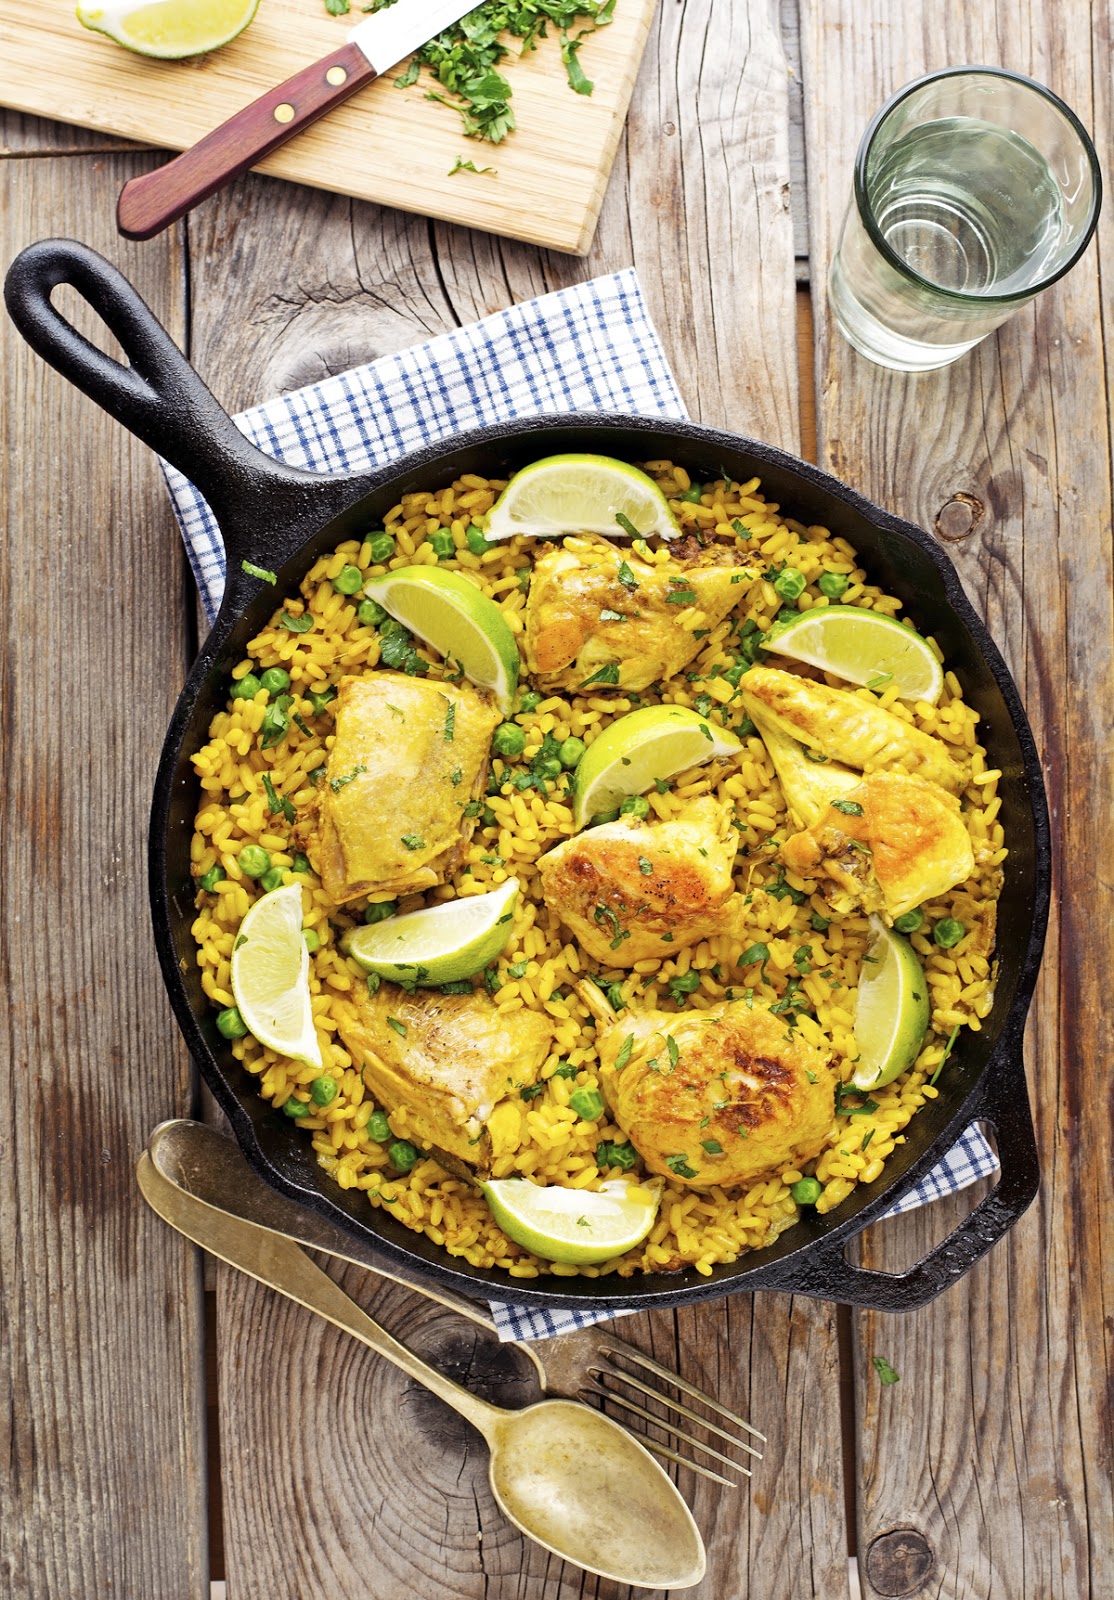 Easy One-Pot Turmeric Chicken and Rice